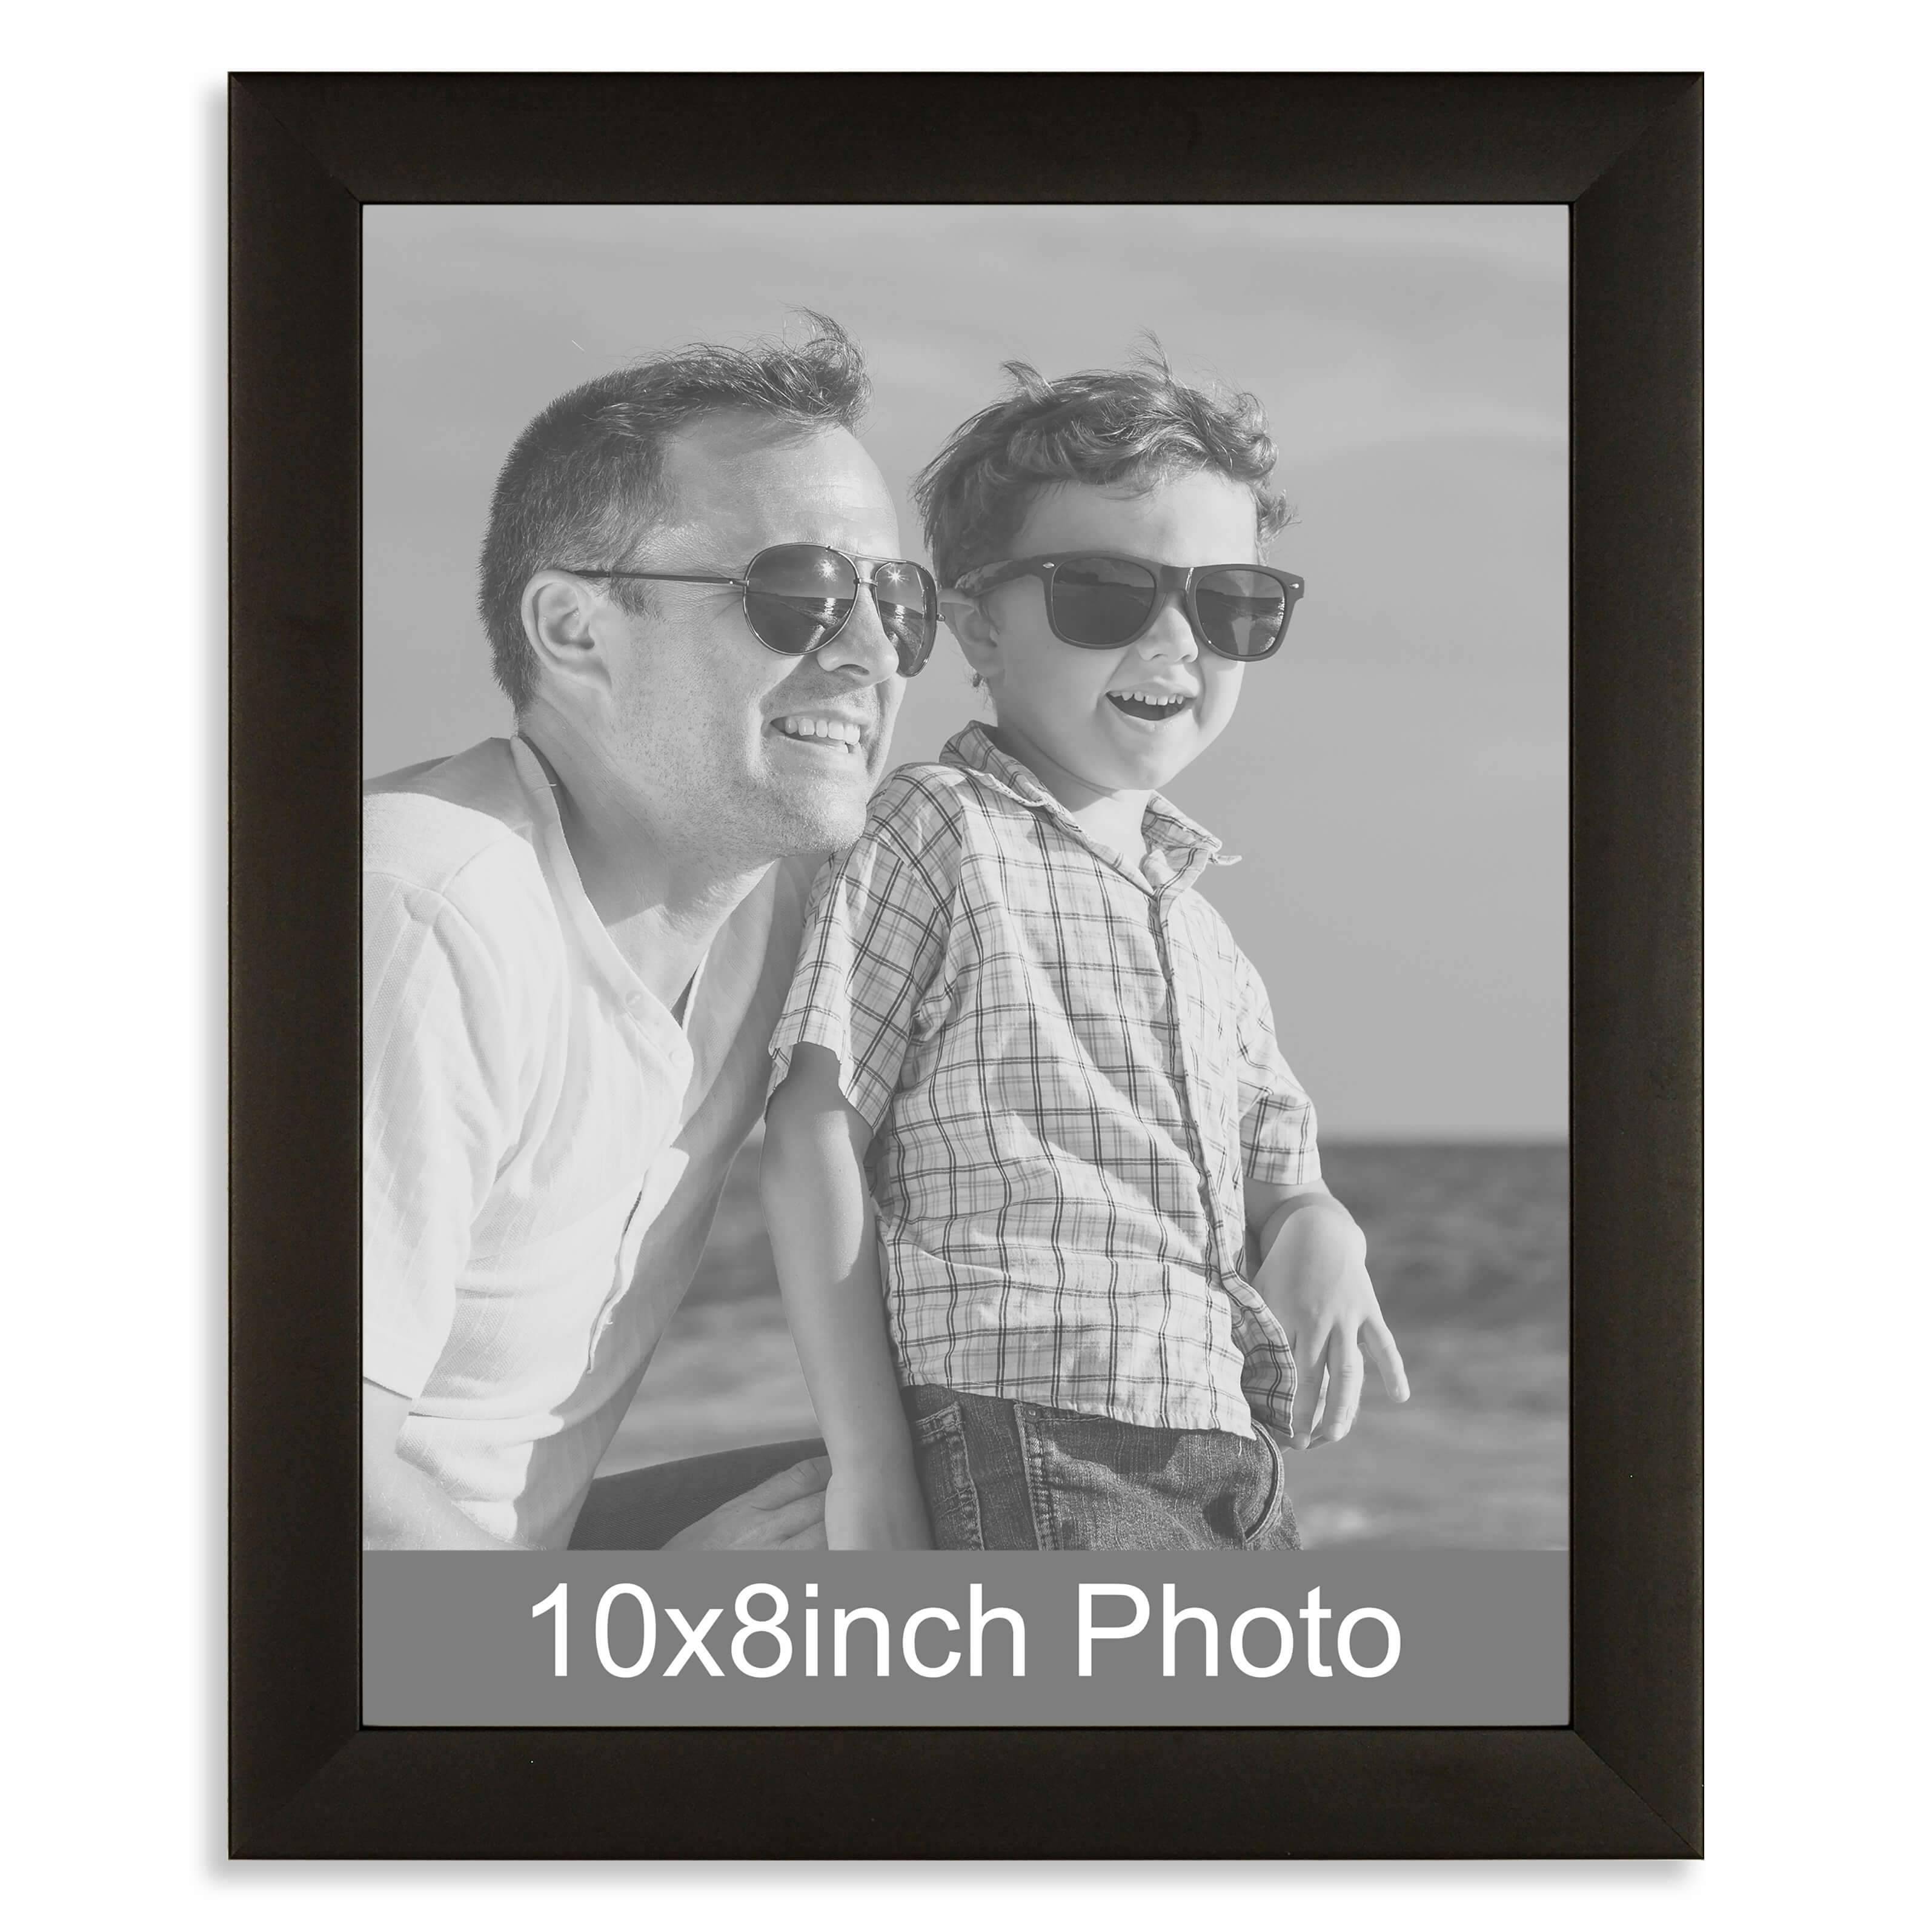 10 x 8inch Black Wooden Photo Frame for a 10×8/8x10in image – Photo to follow on email